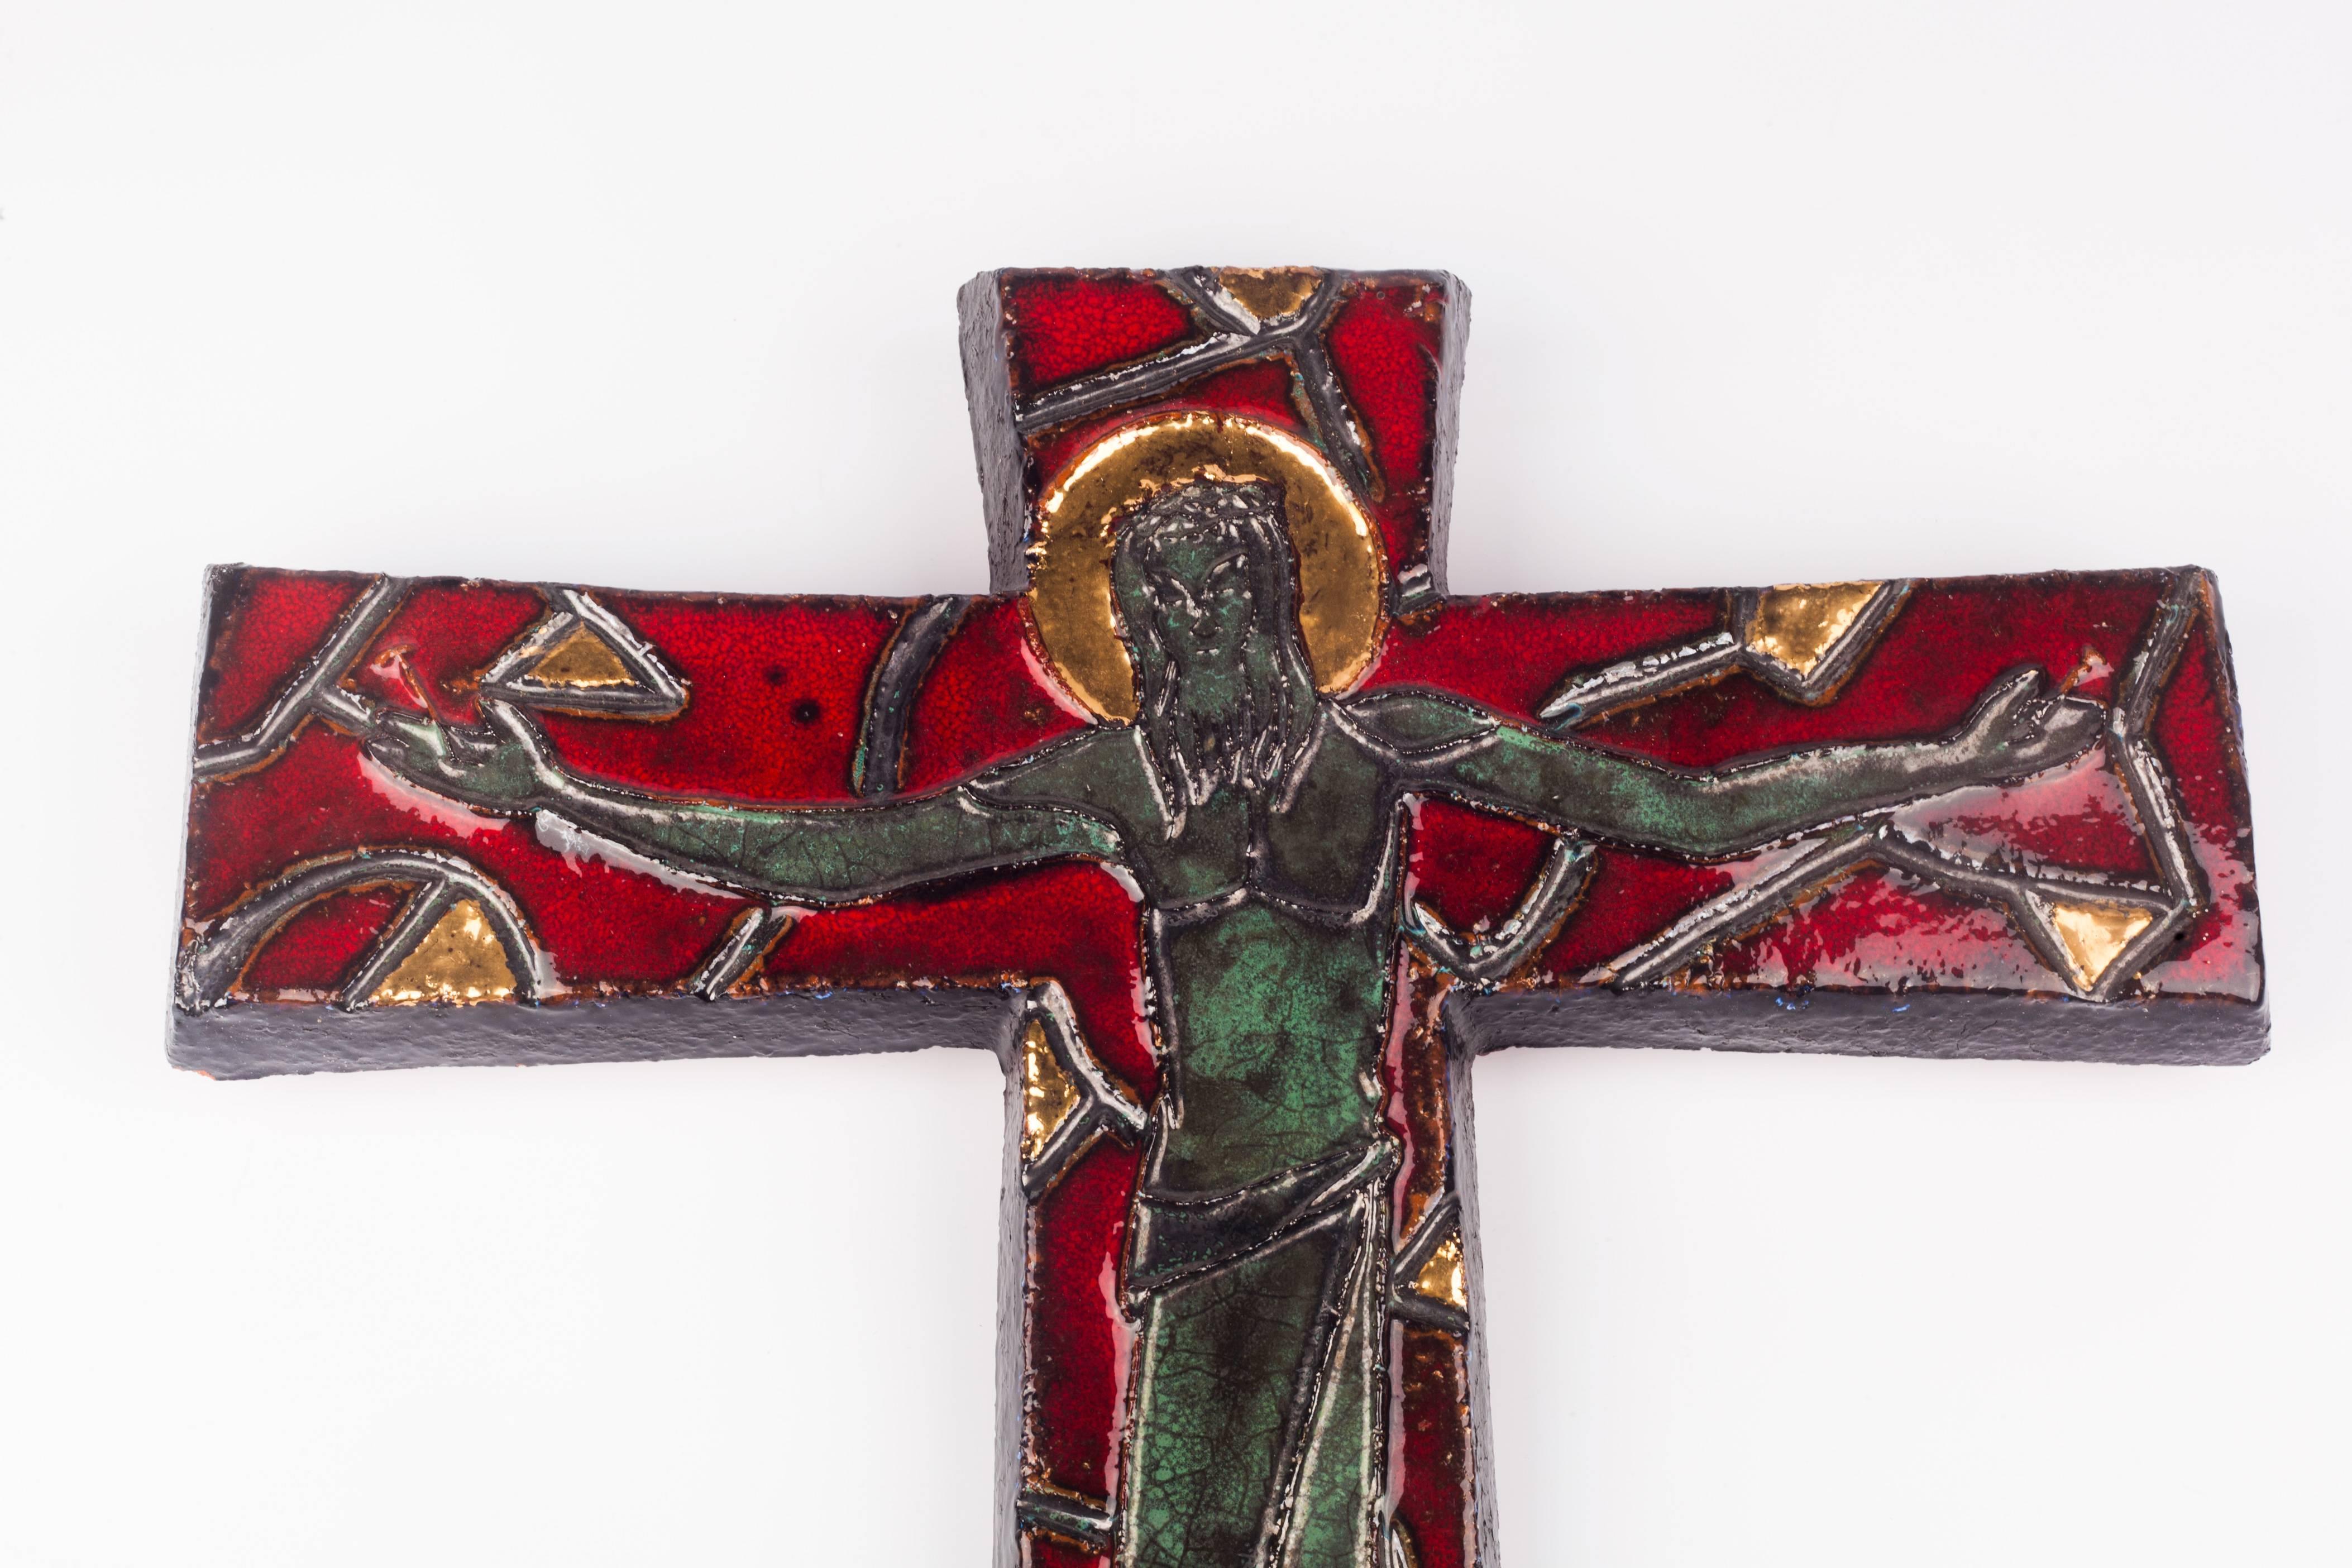 

Large, 16 inch tall wall crucifix in ceramic, made in Belgium in the 1980s.
Glossy marine green and grey iridescent christ on a deep red cross with stylized green-grey details resembling thorns. Gilt details throughout as well as halo around